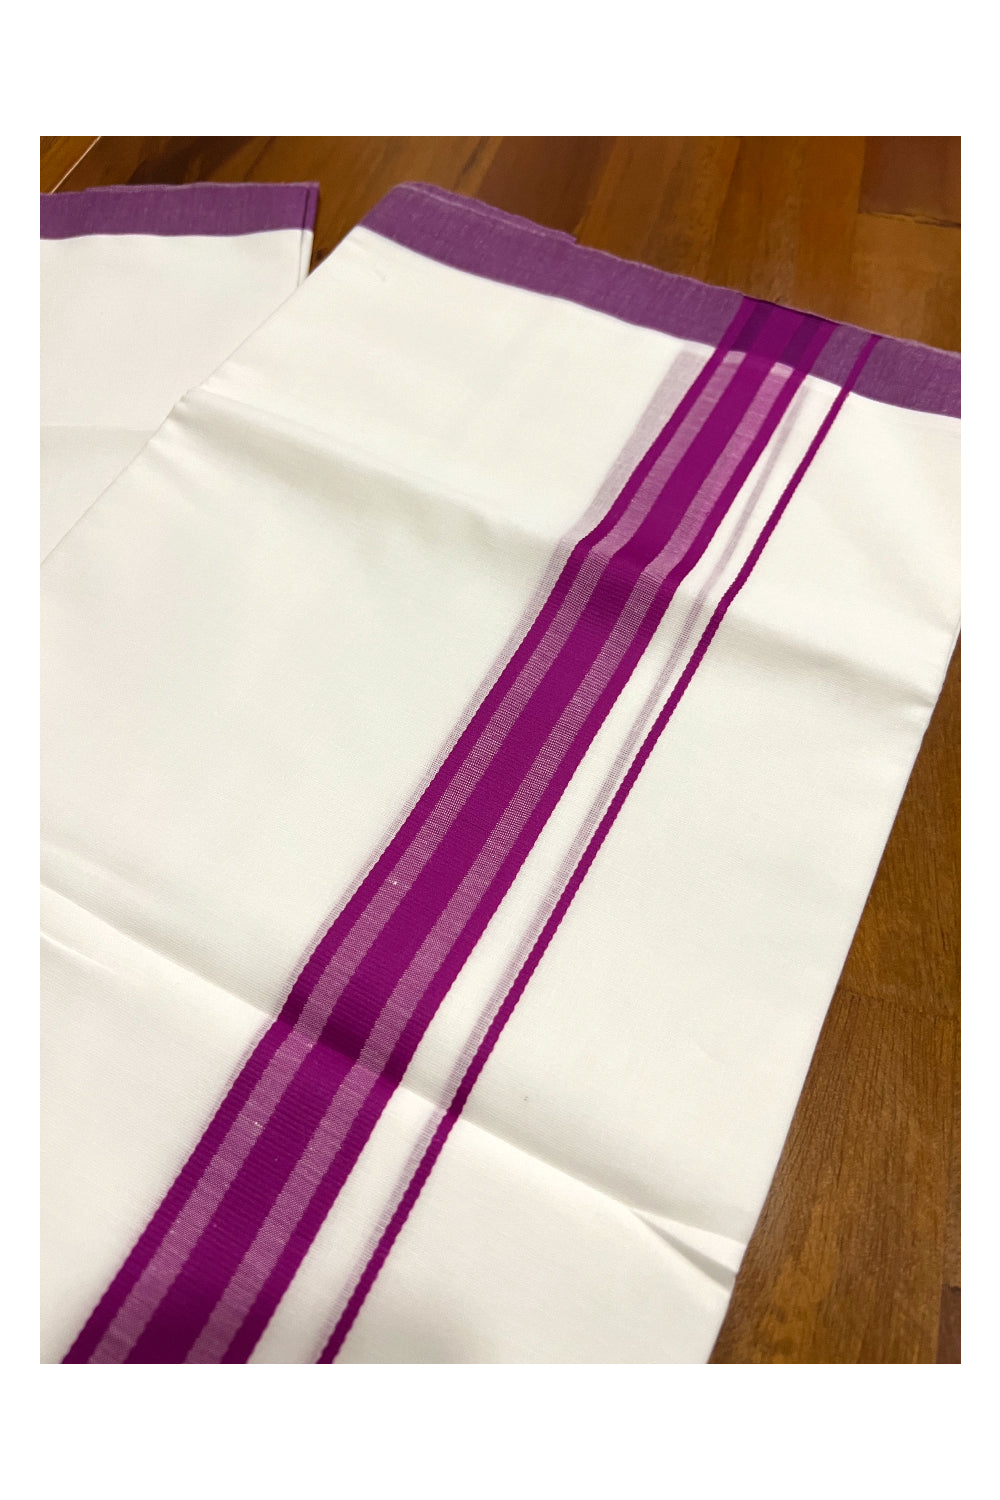 Pure White Cotton Double Mundu with Magenta Line Border (South Indian Dhoti)